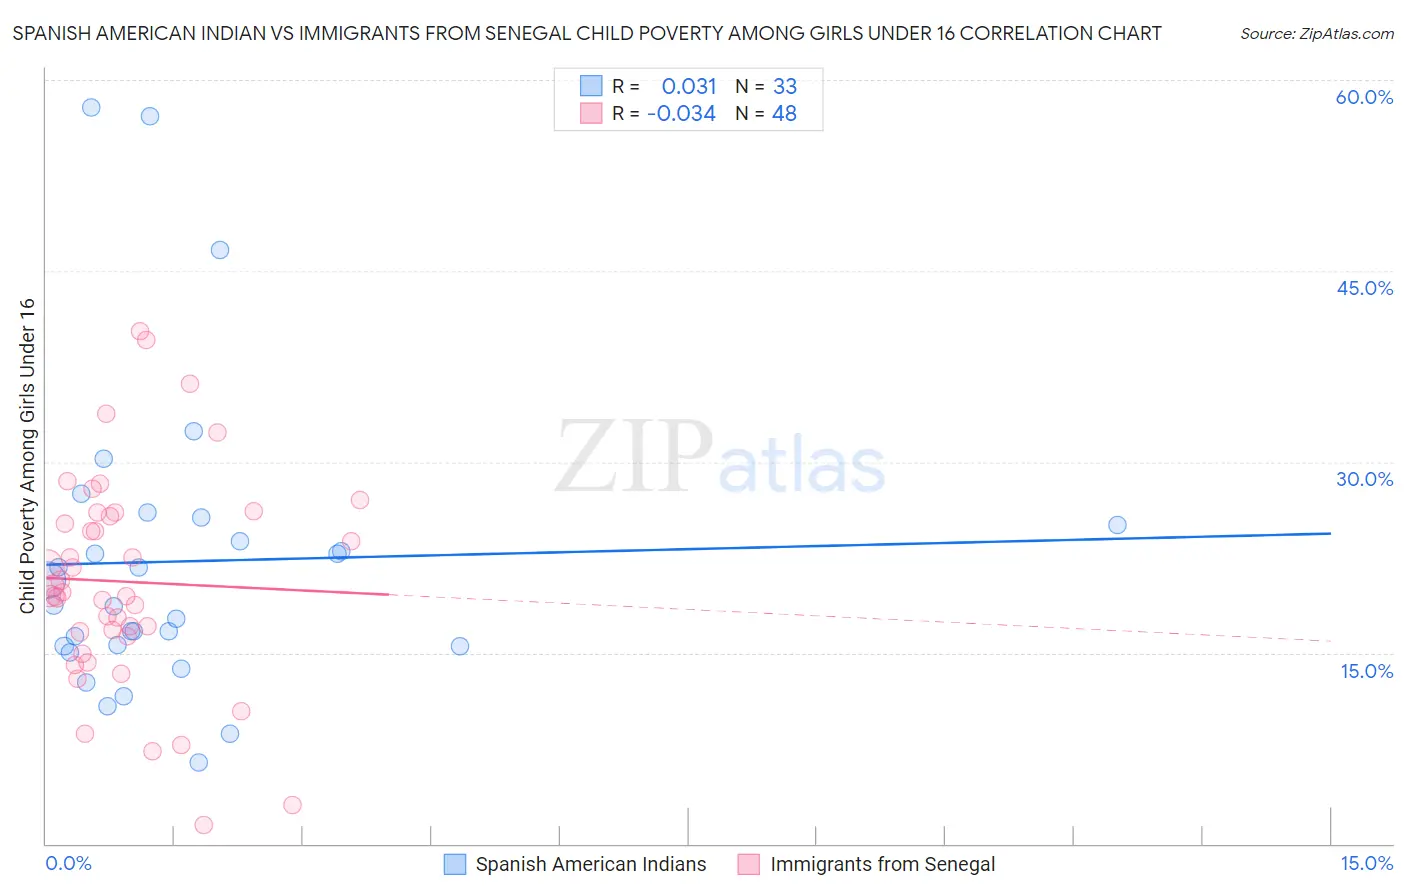 Spanish American Indian vs Immigrants from Senegal Child Poverty Among Girls Under 16